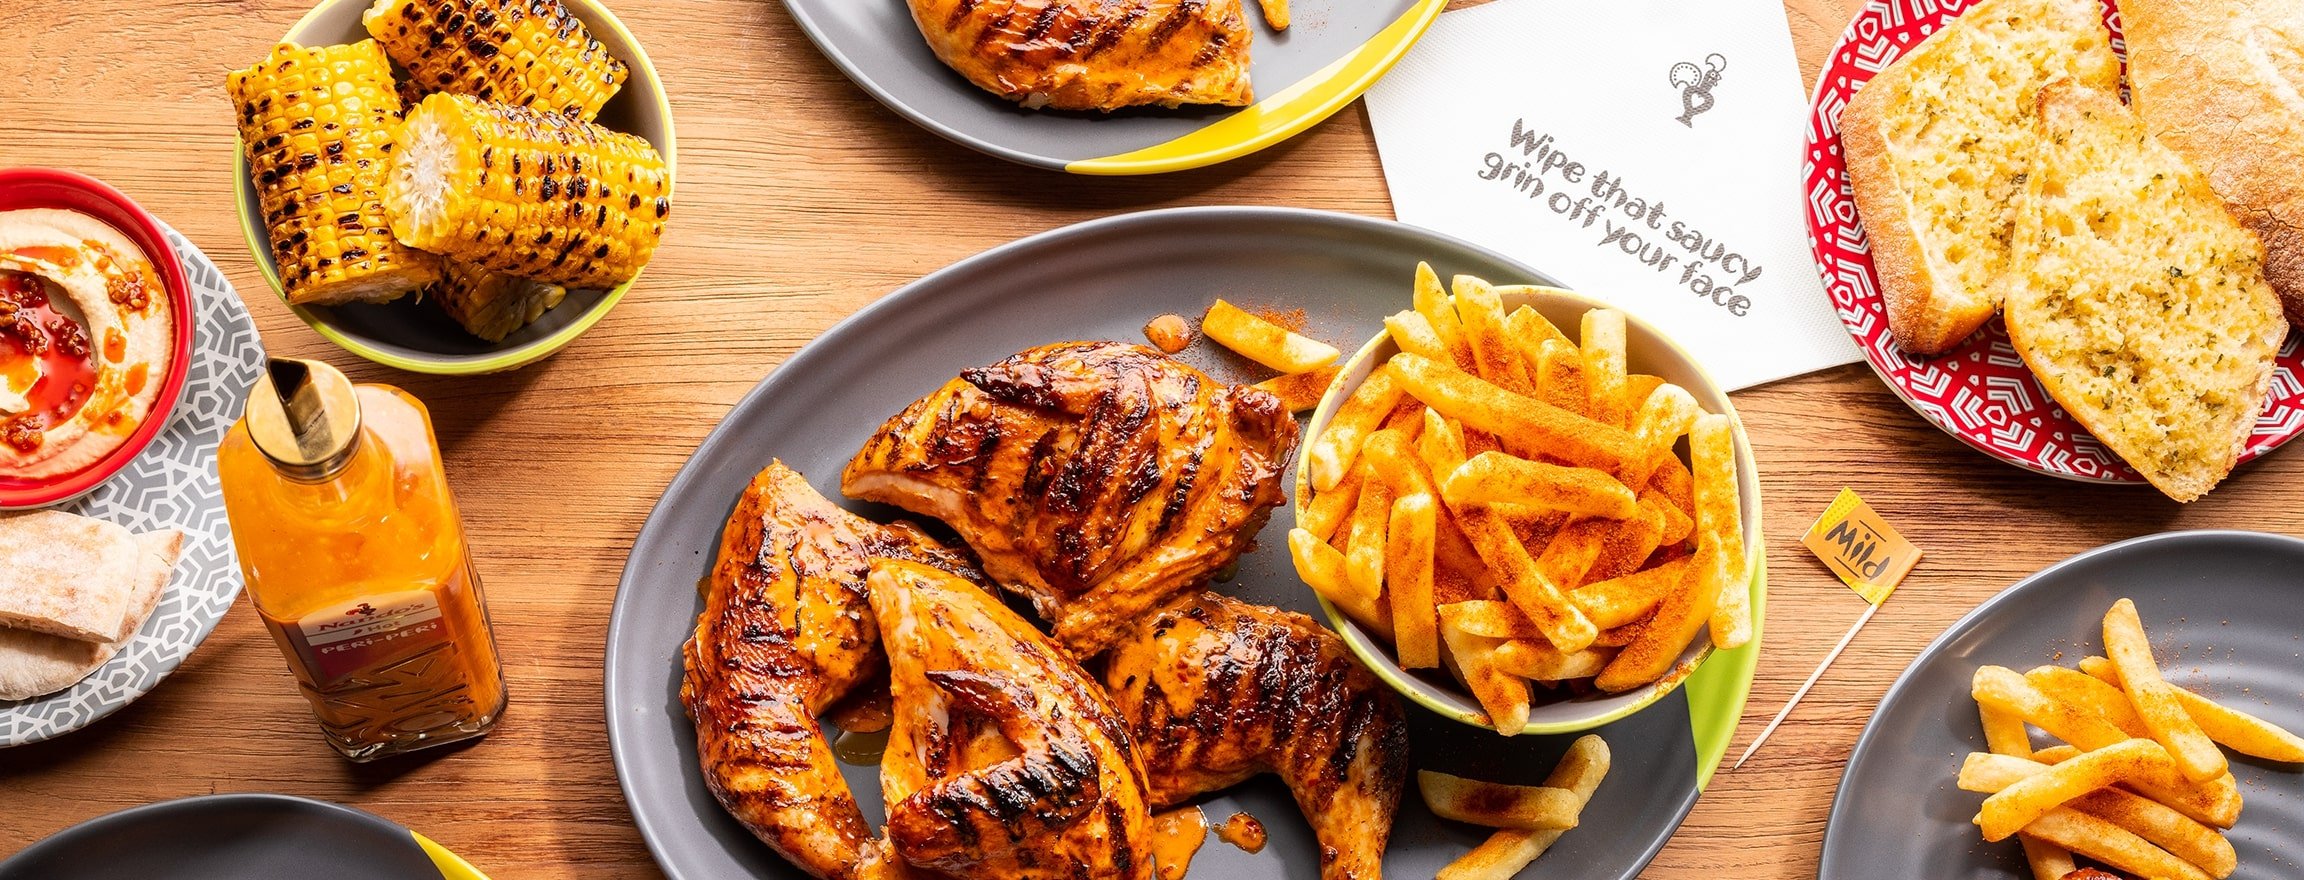 a Nando’s meal on a table including PERi-PERi chicken, a salad, chips, and a selection of sides